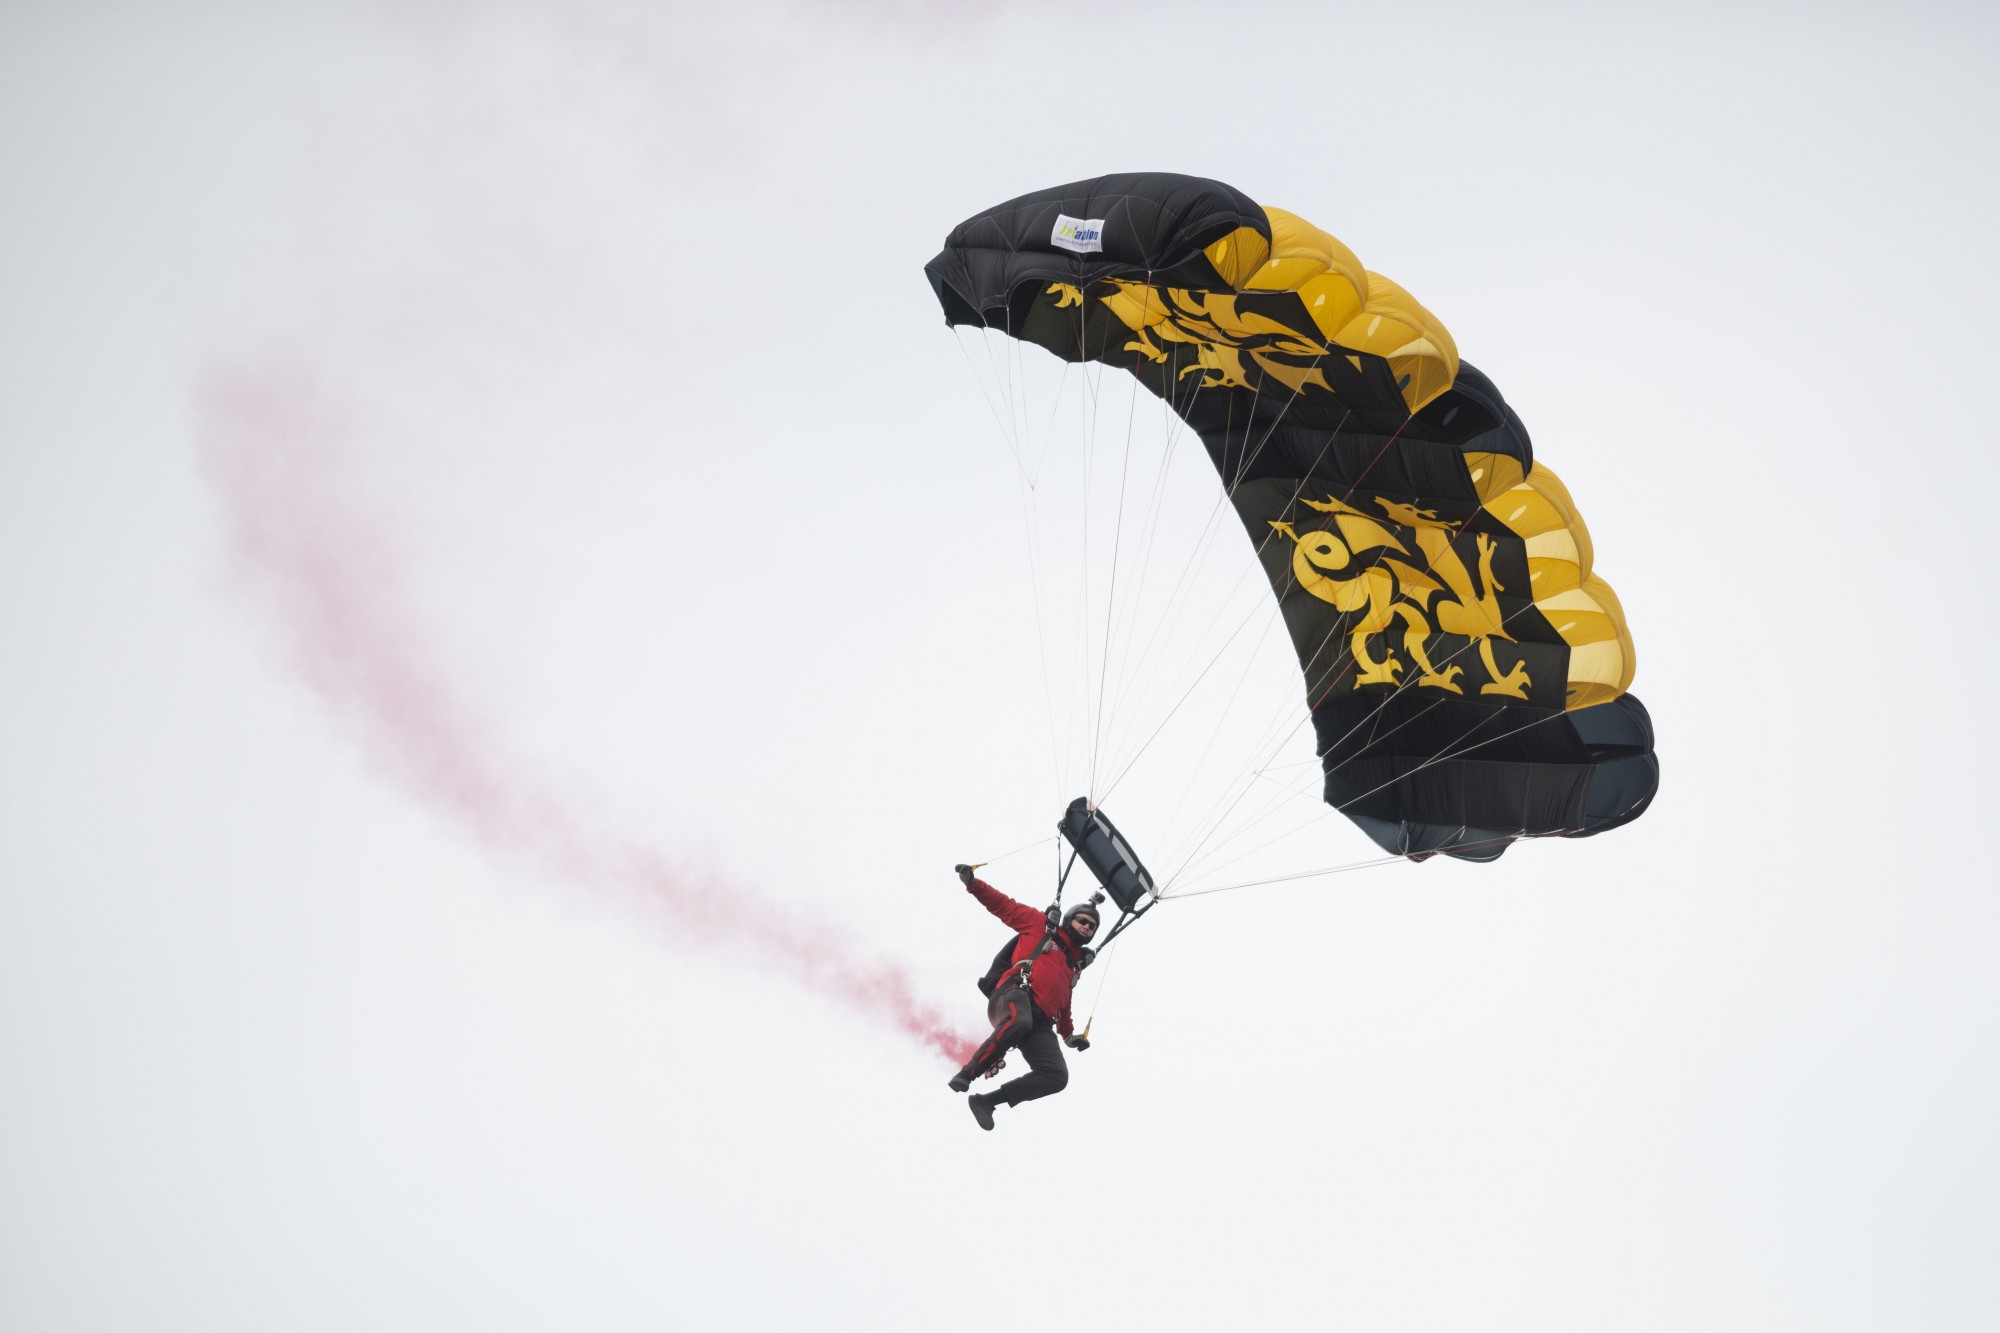 Skydivers land in TCF Bank Stadium on Saturday, Nov. 9. The Gophers defeated Penn State 31-26 to bring their record to 9-0. A first since 1904. 